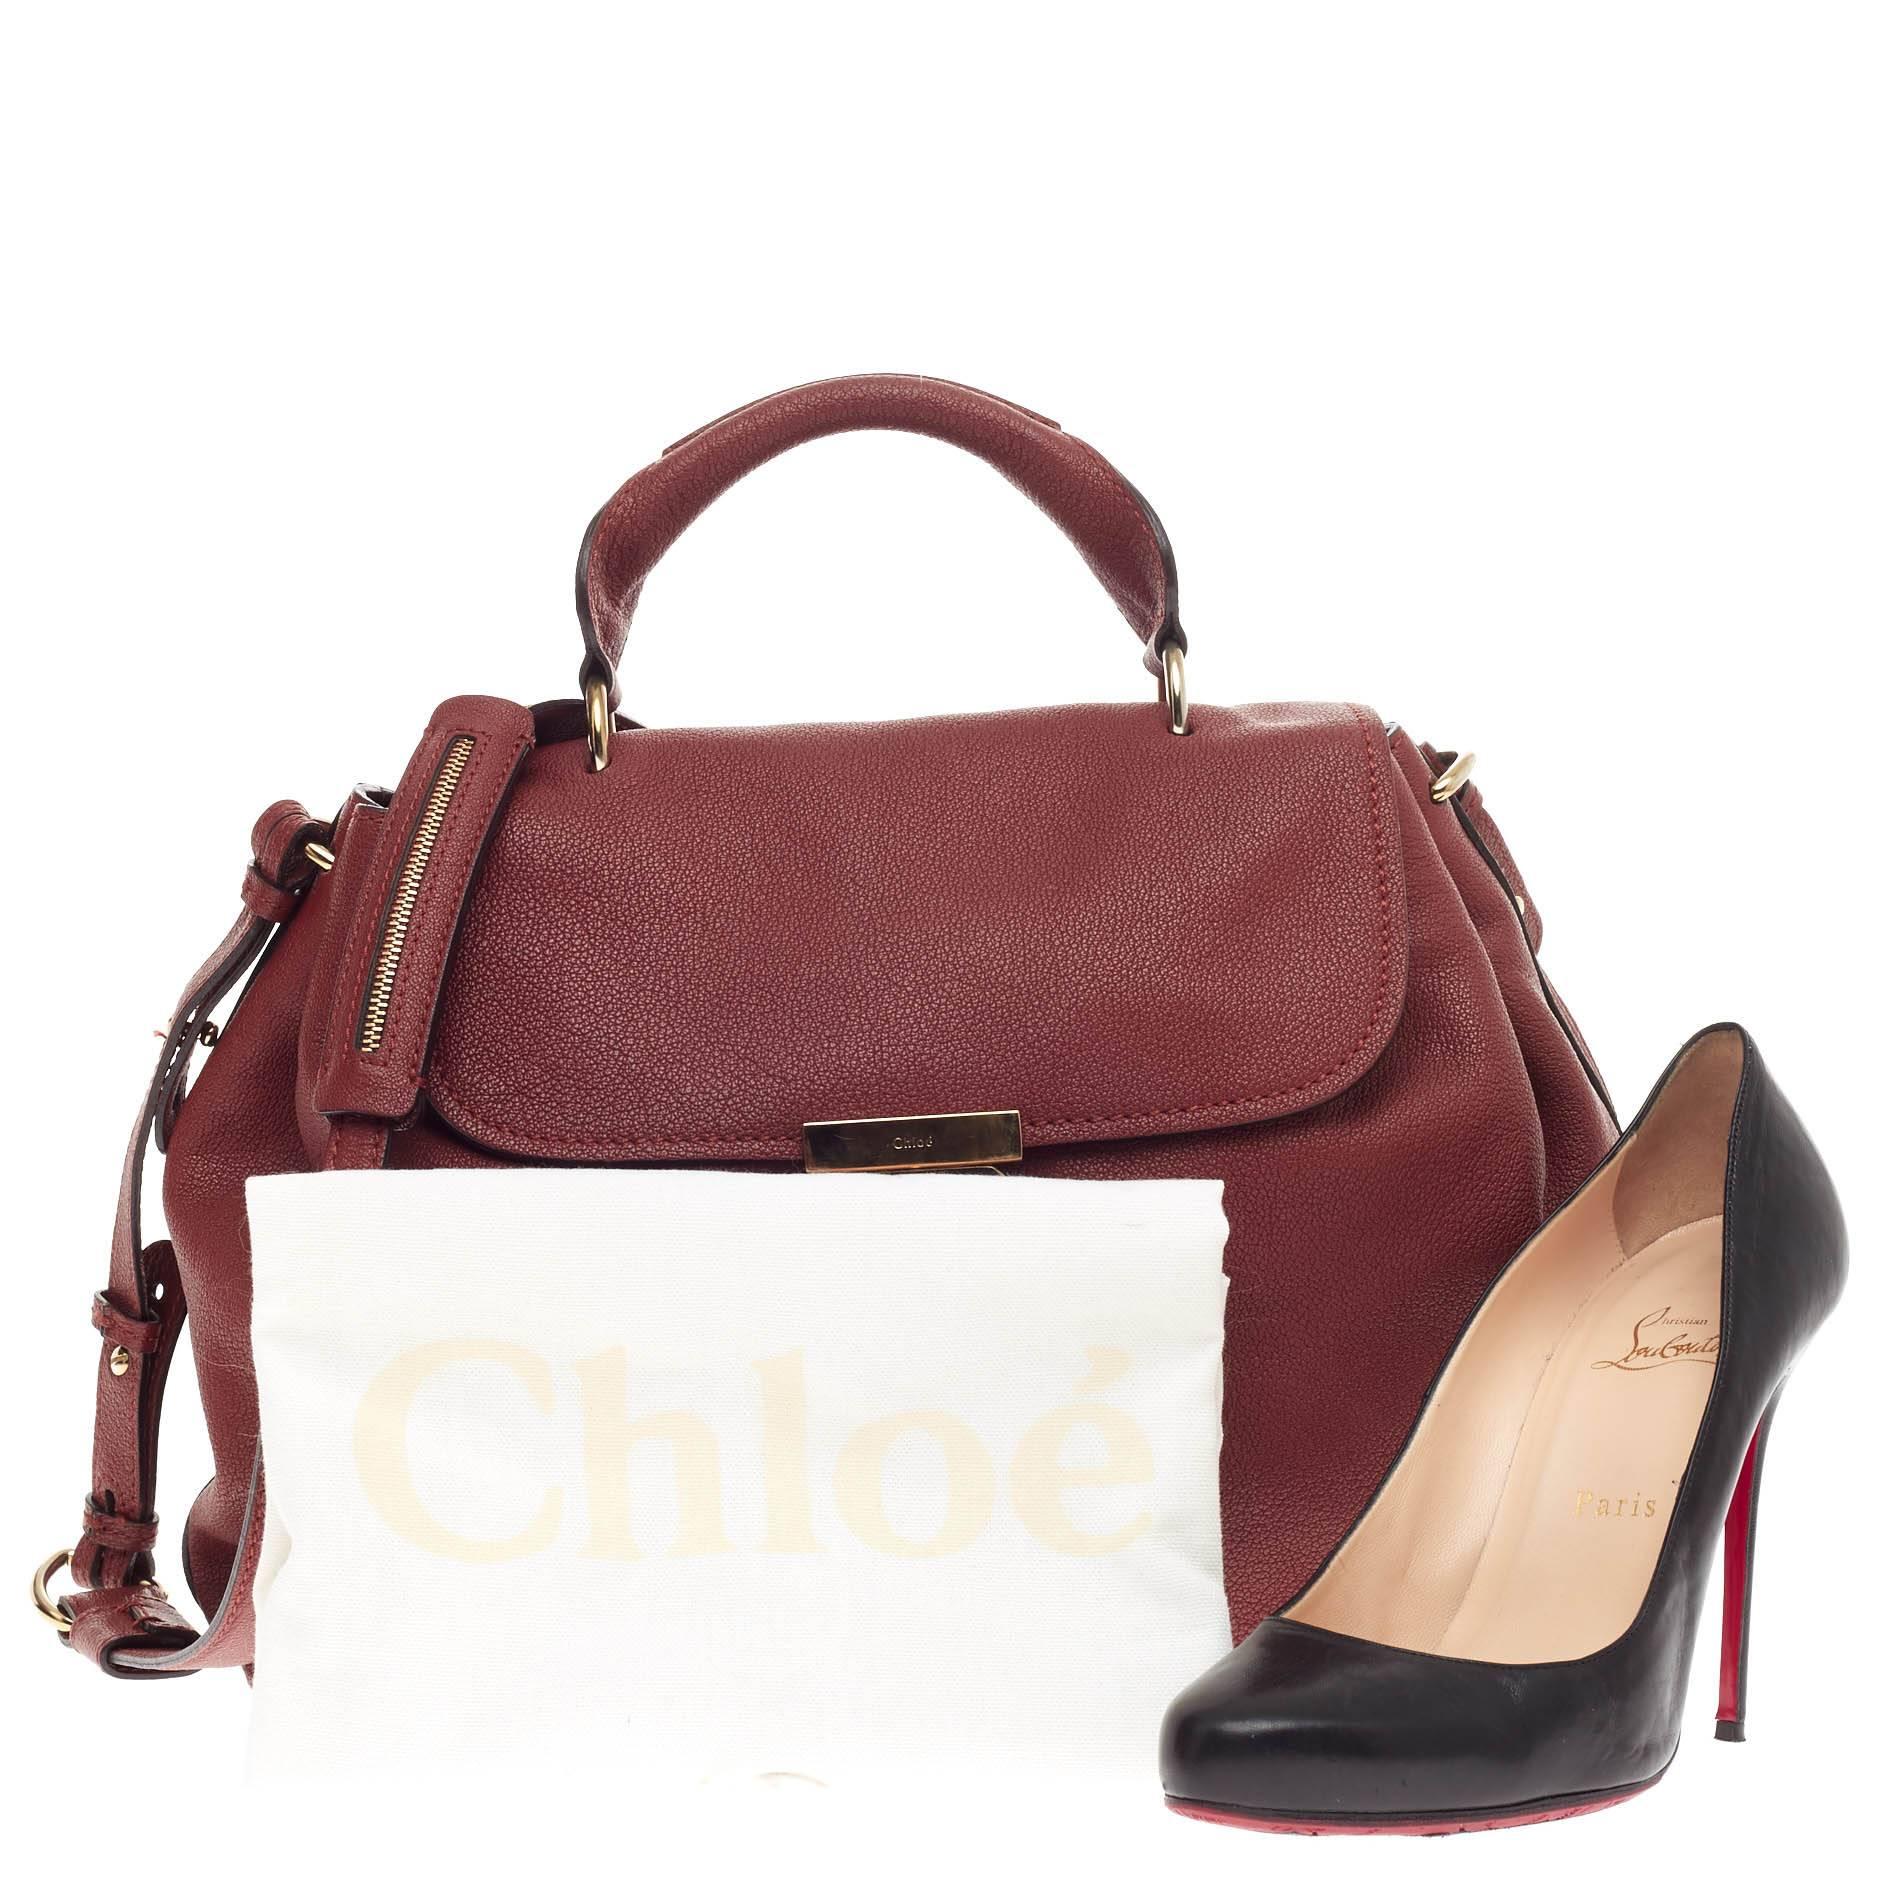 This authentic Chloe Elsie Convertible Satchel Leather Medium first introduced in the brand’s 2012 Spring collection mixes effortless style and easy functionality. Crafted from supple burgundy red leather, this satchel features a single rolled